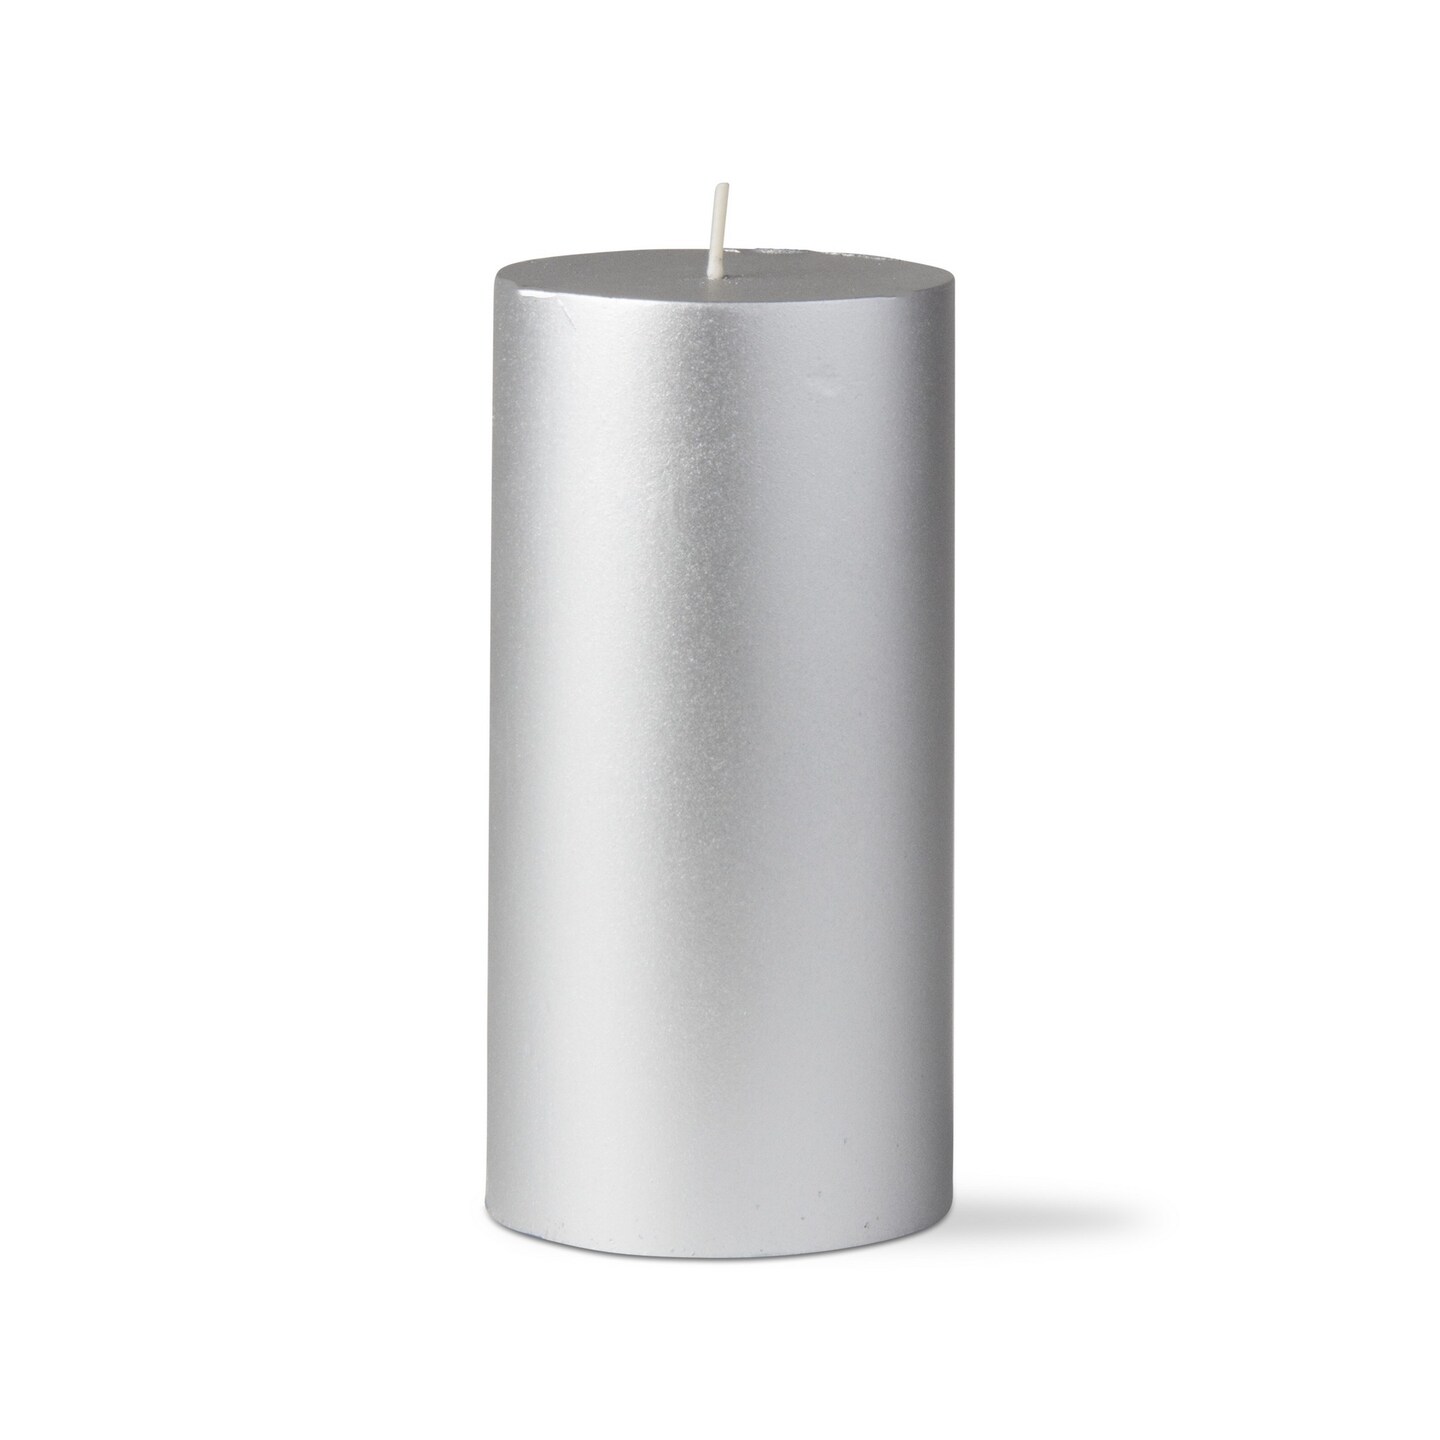 Silver Metallic Pillar Paraffin Wax Candle 3X6 Unscented Drip-Free Long Burning 80 Hours For Home Decor Wedding Parties